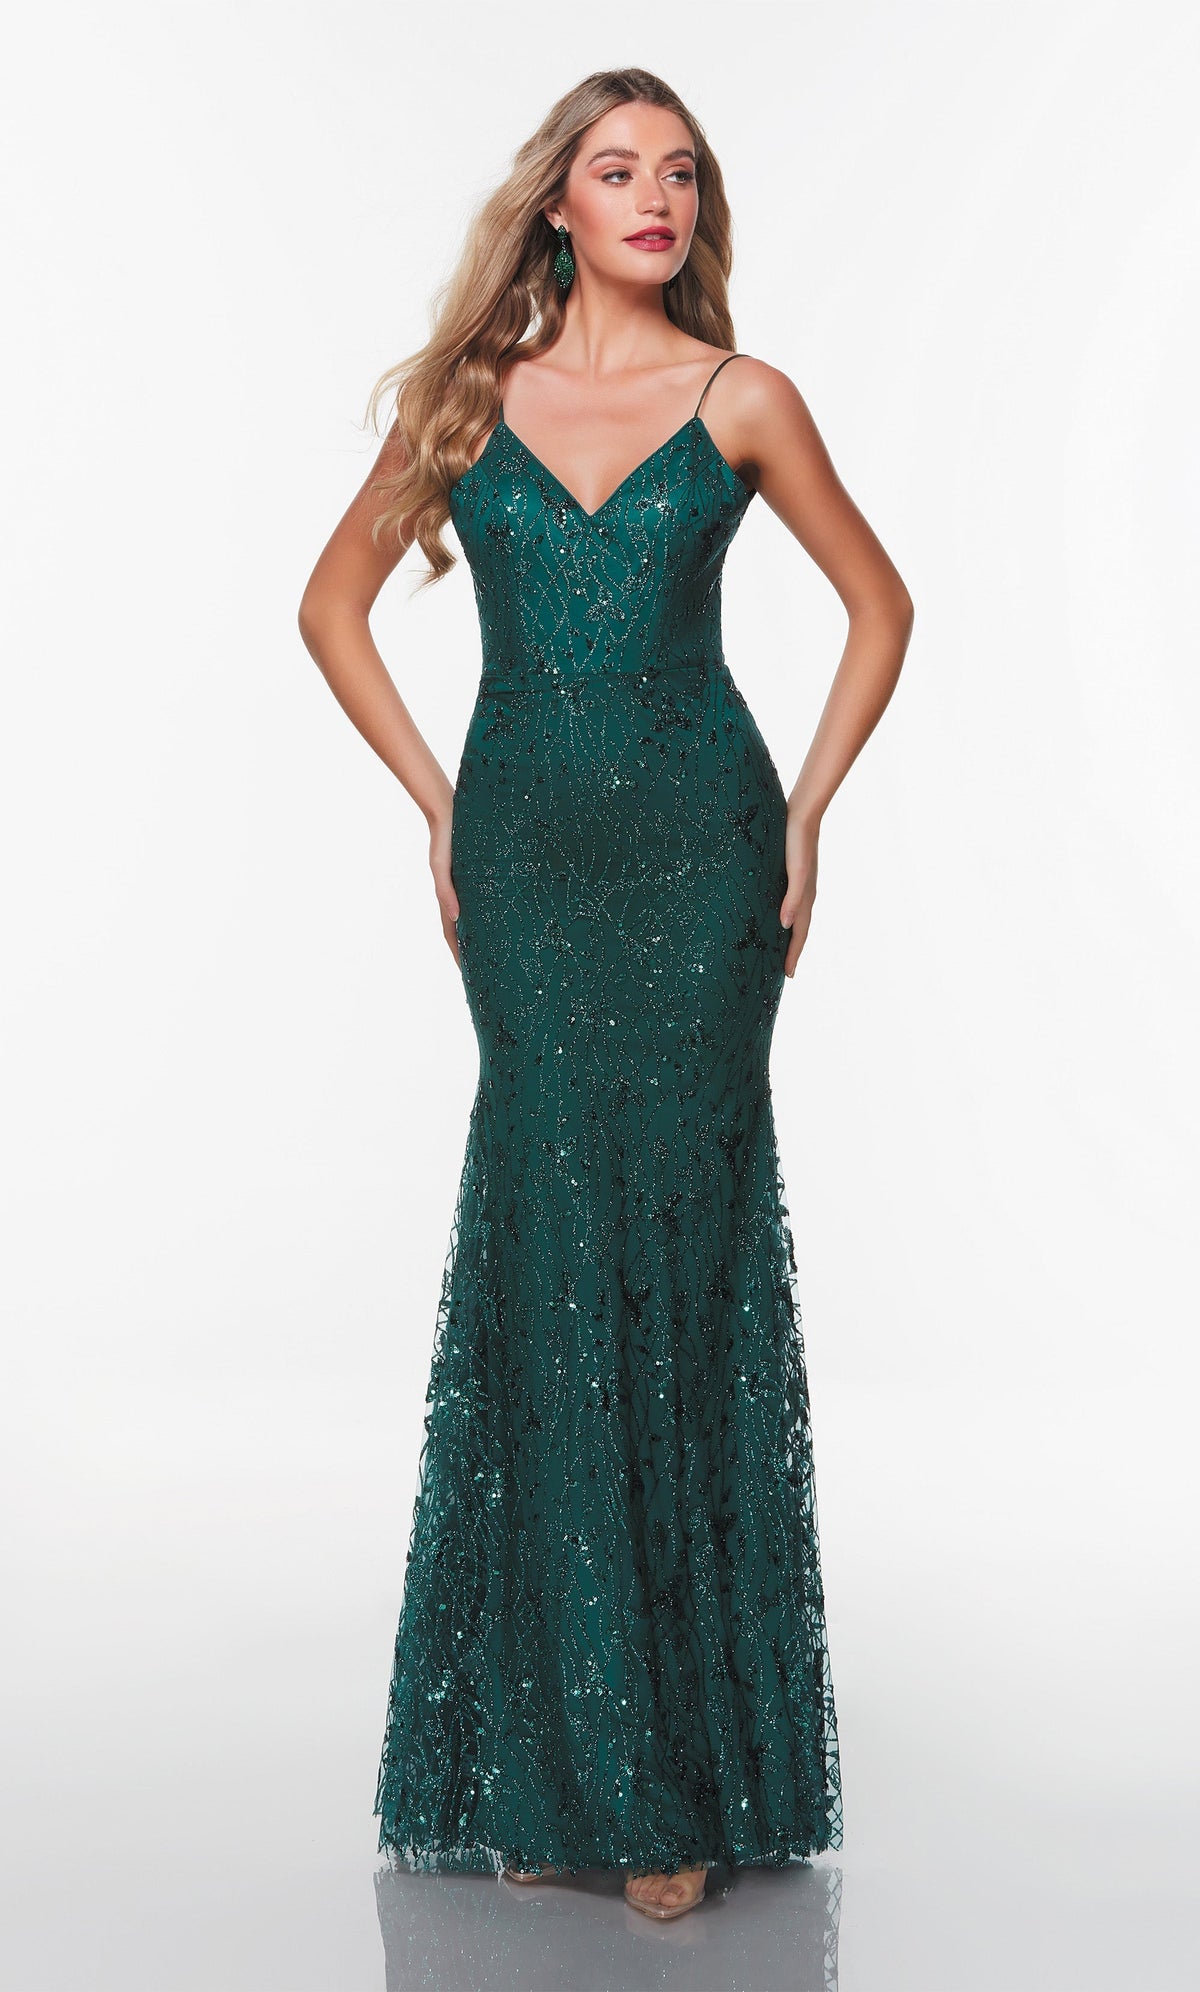 Pine green, sparkly evening gown with a V neckline.